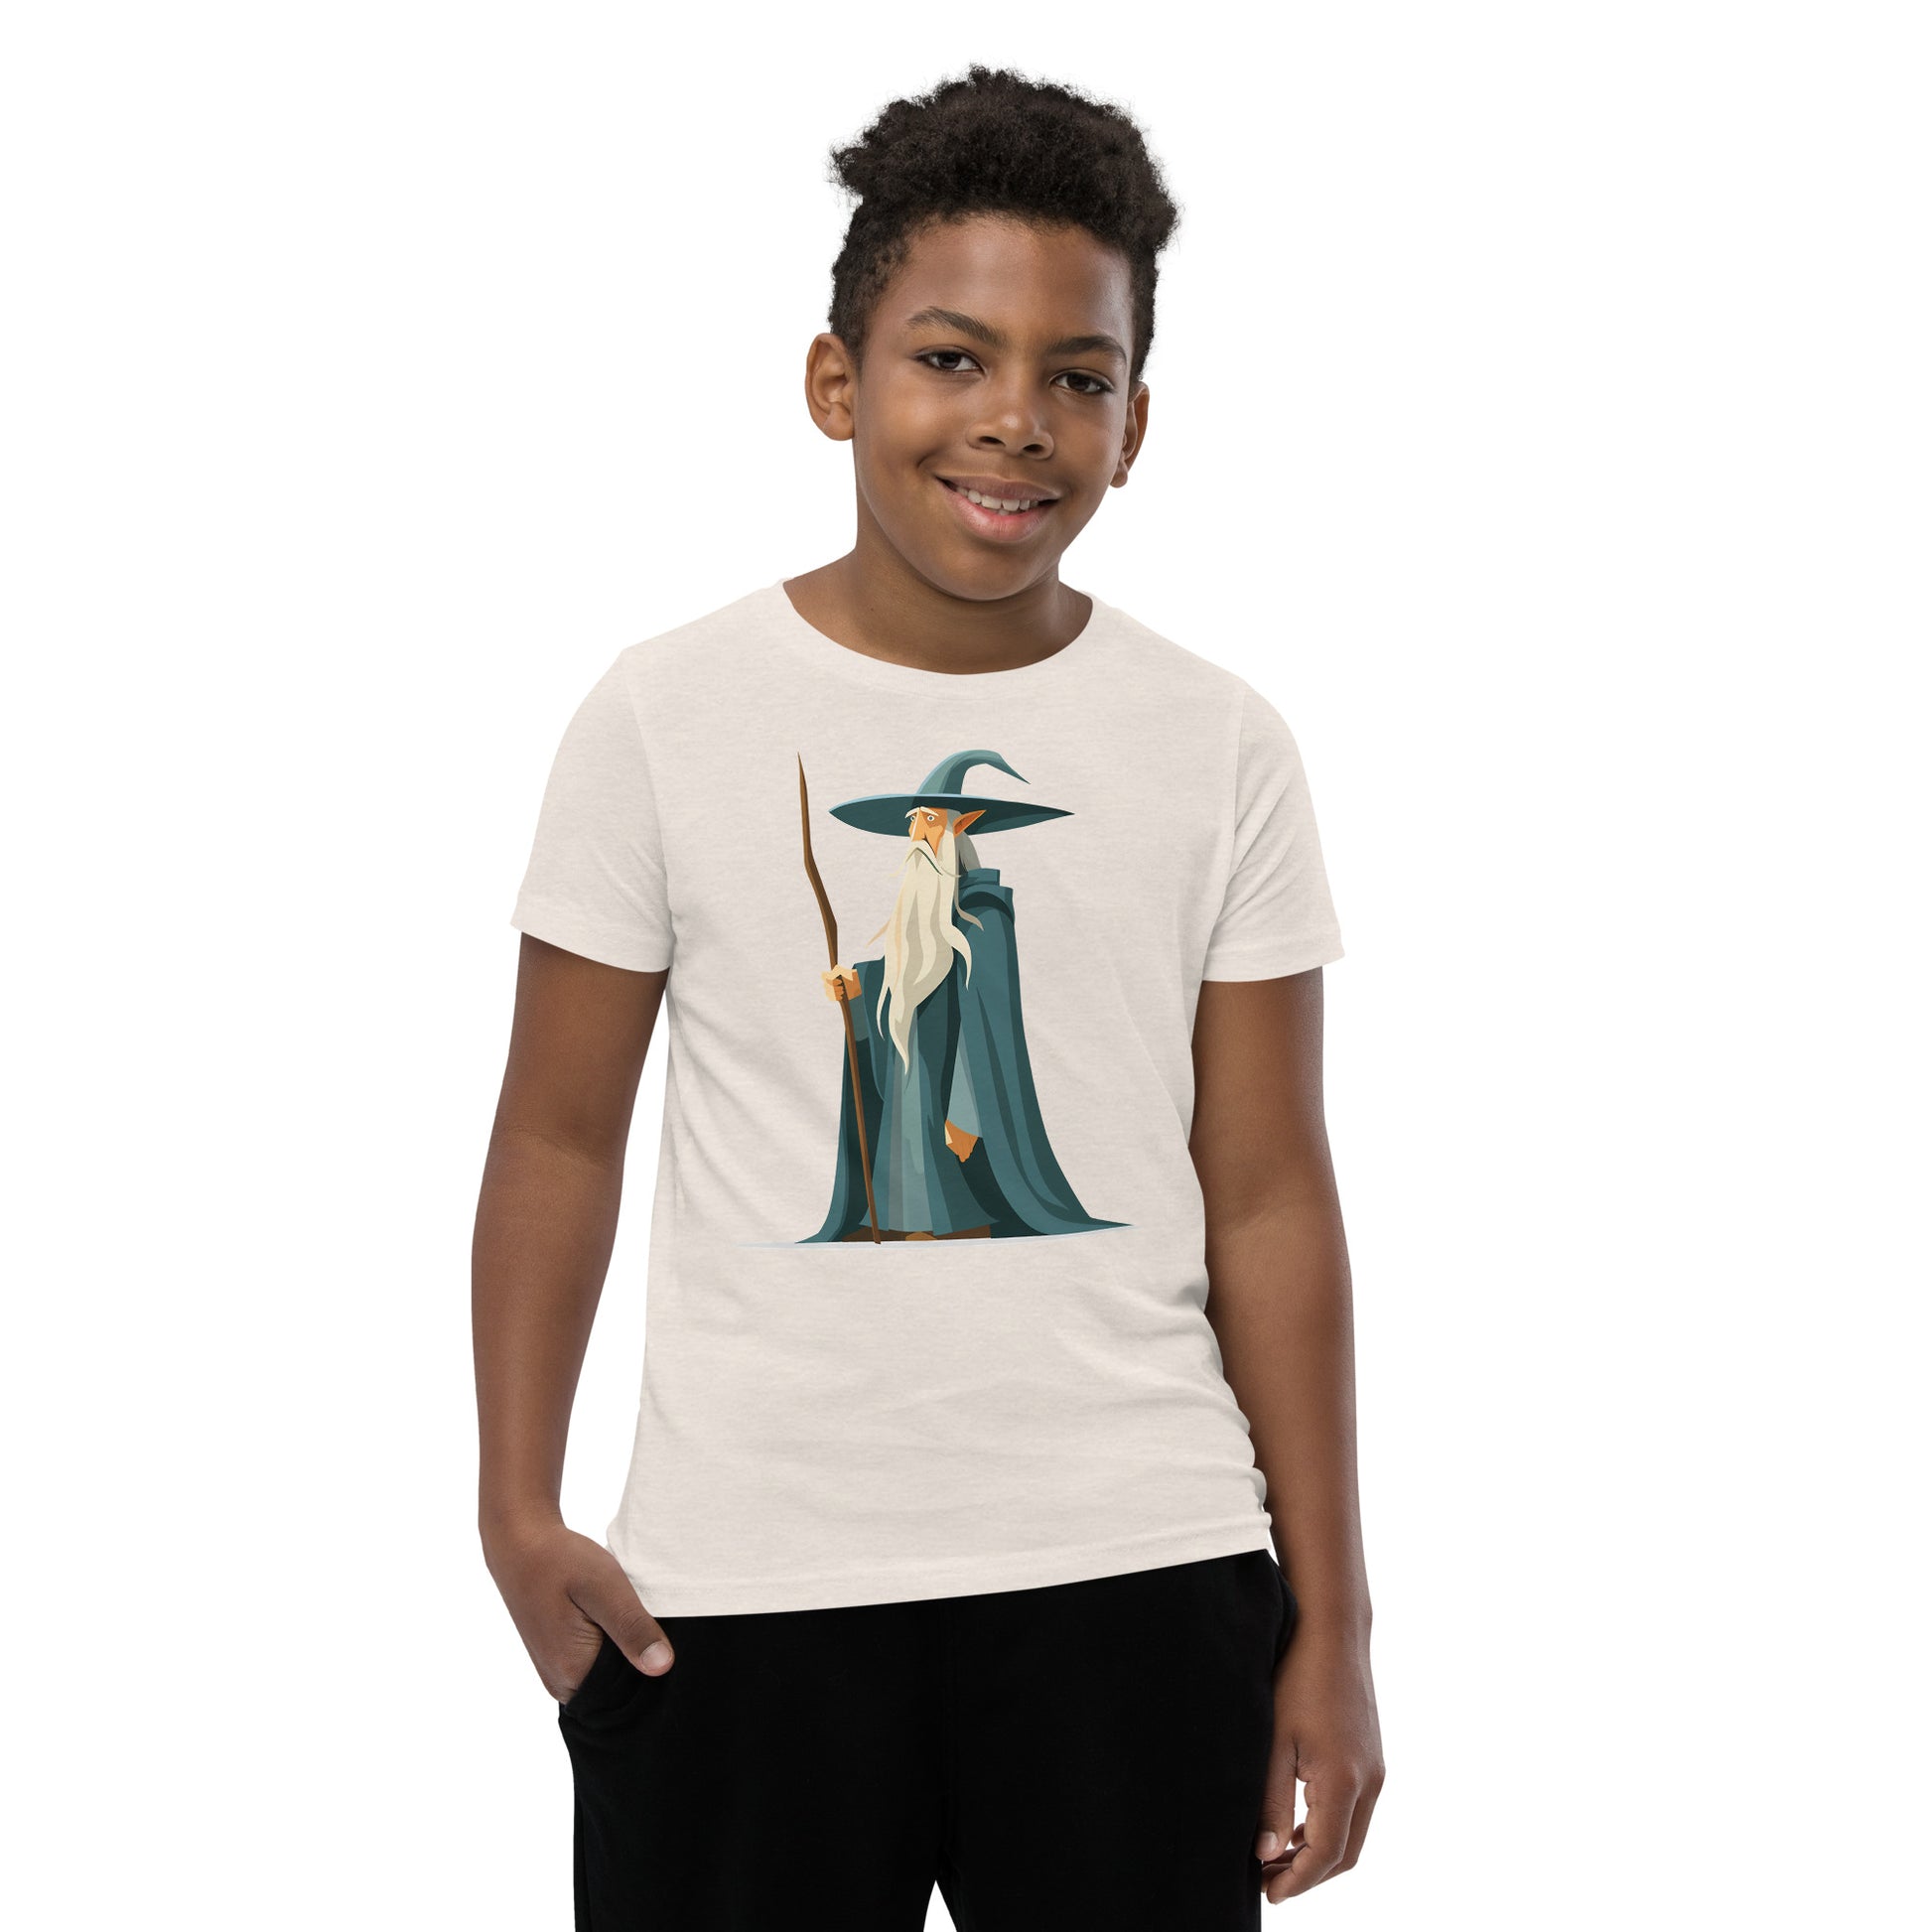 Boy with a heather dust T-shirt with a picture of a magician